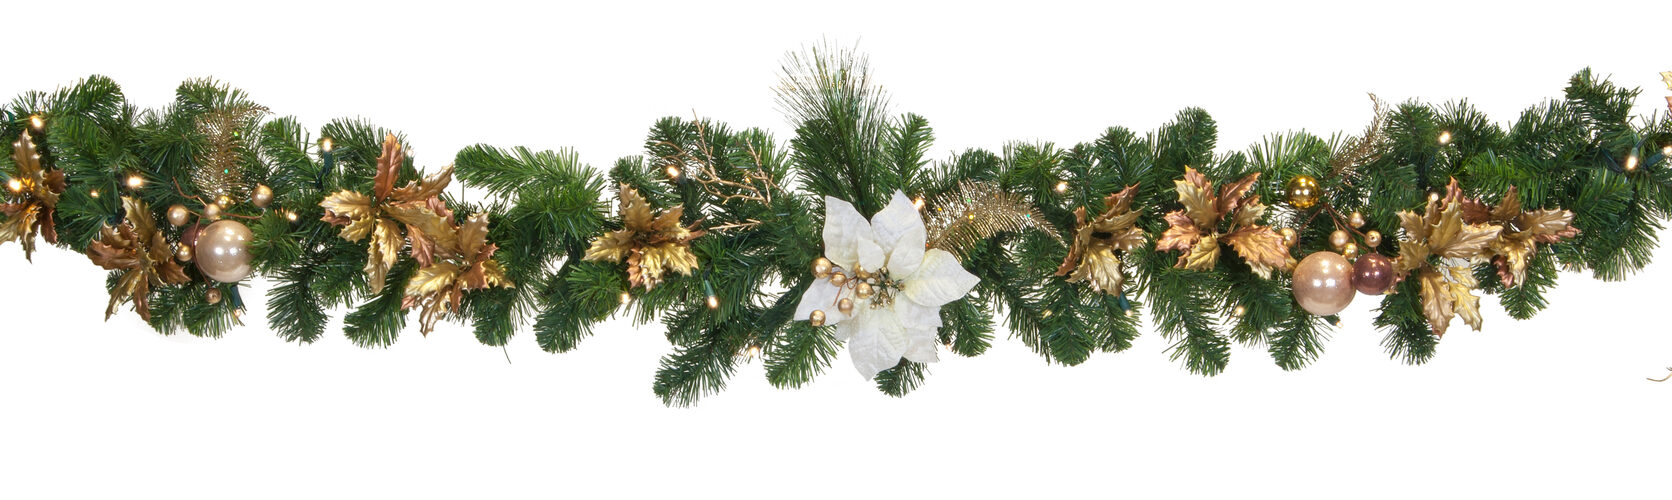 9' x 14" Canterbury Battery Operated LED Holiday Garland, 60 Warm White Lights